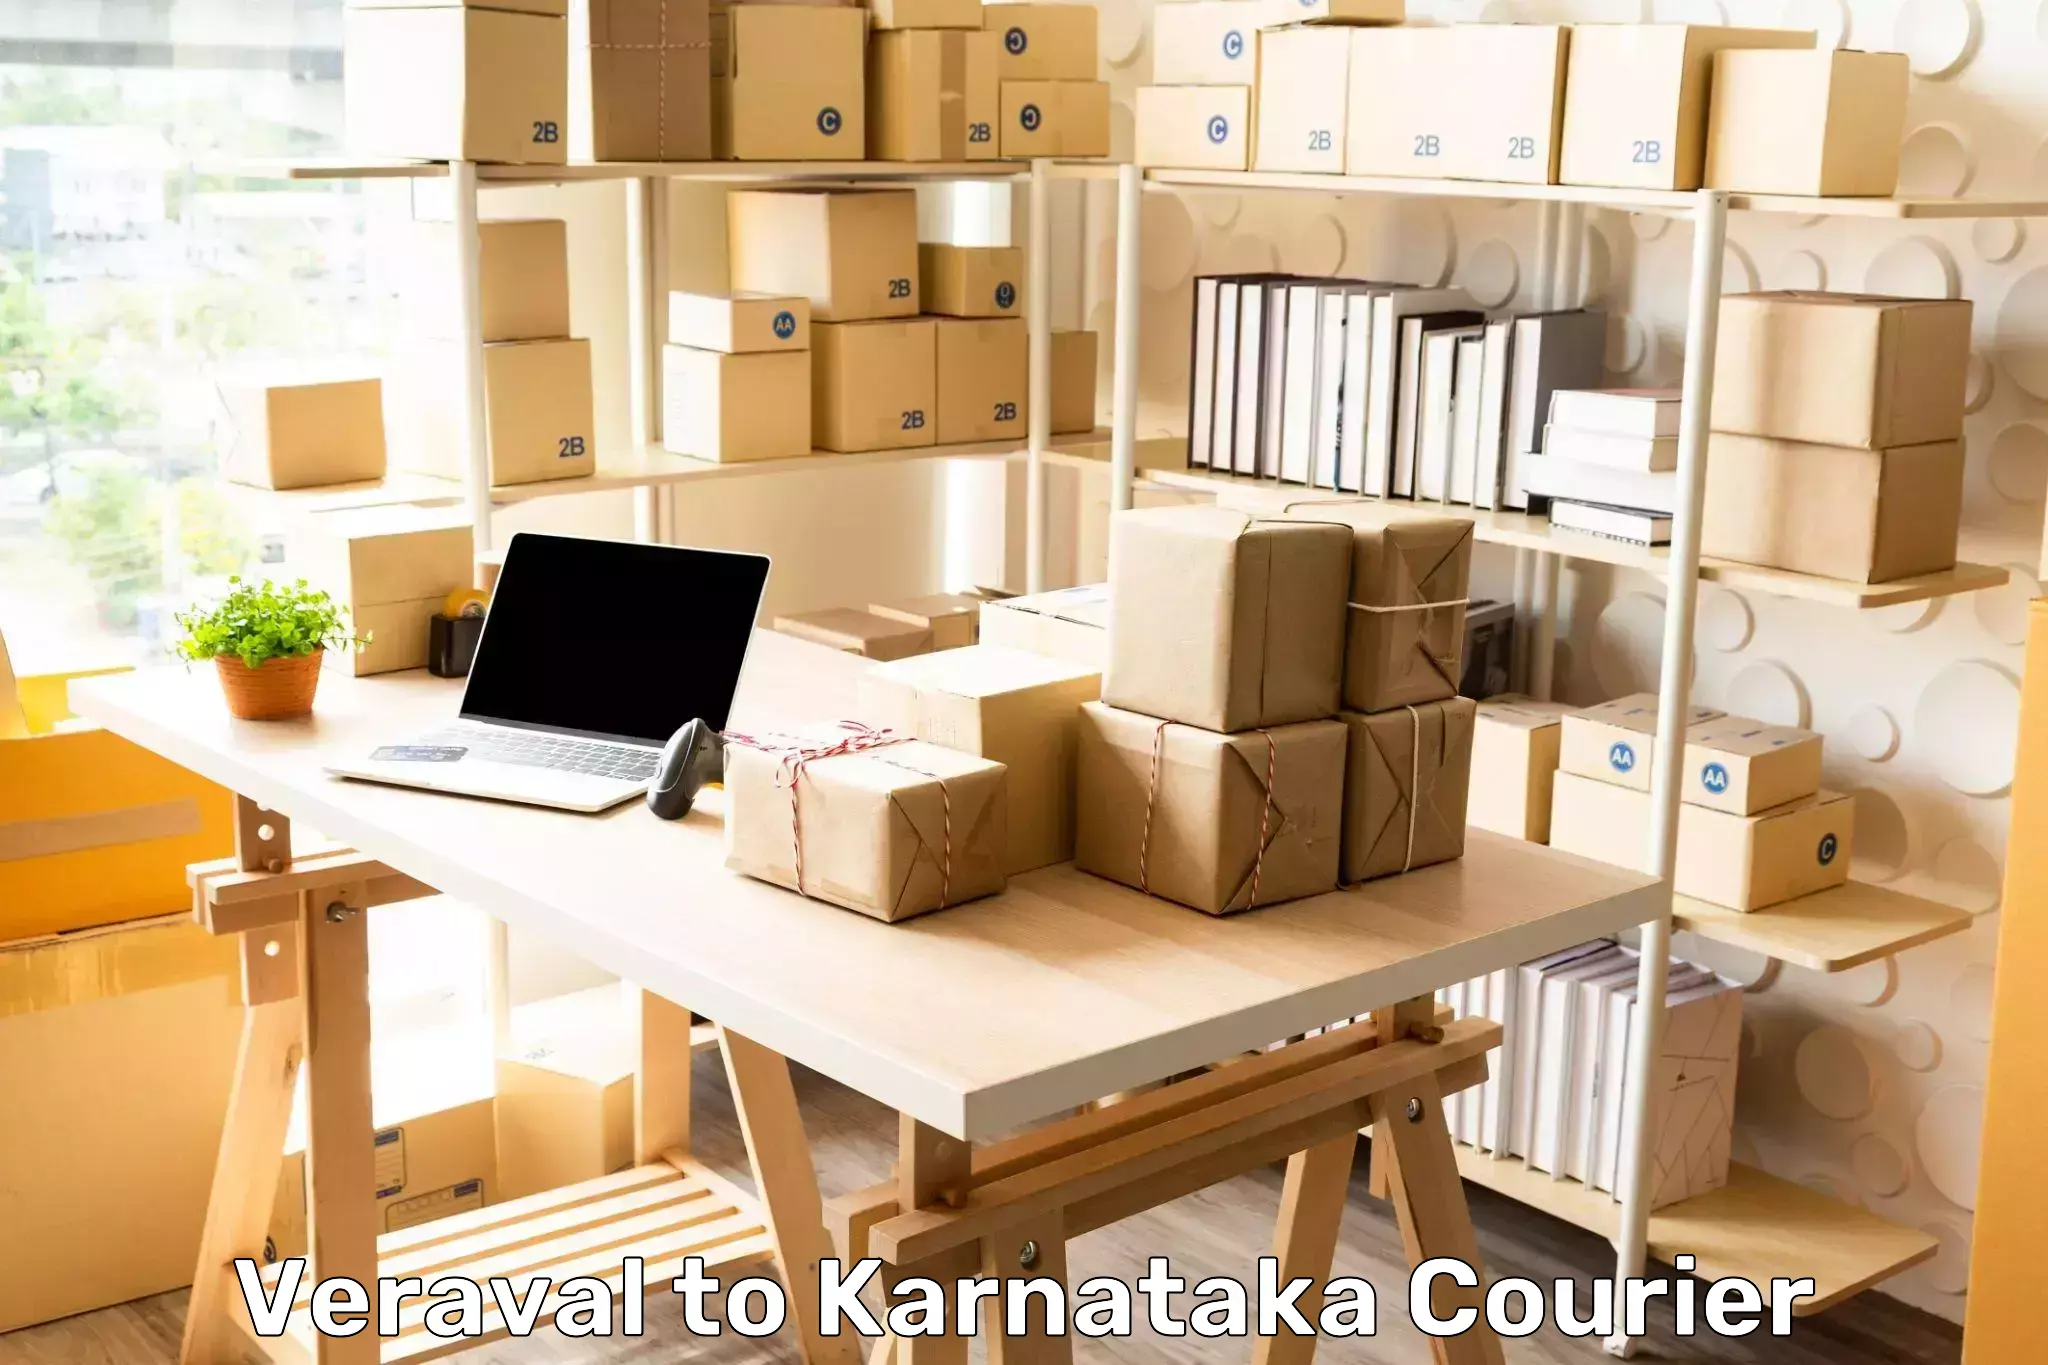 Same-day delivery solutions Veraval to Kollegal